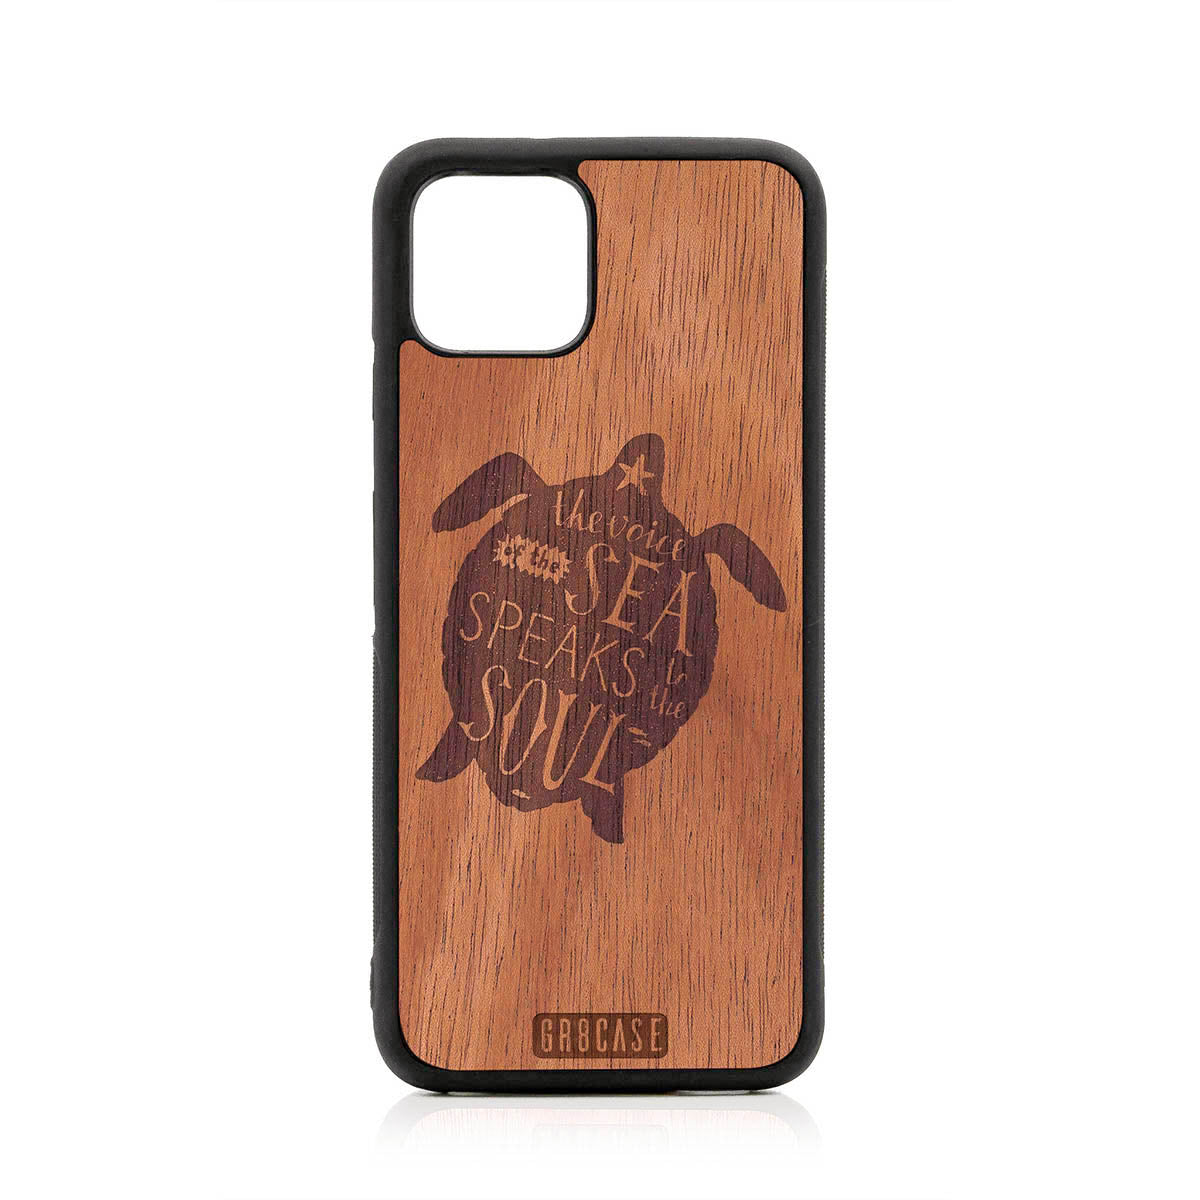 The Voice Of The Sea Speaks To The Soul (Turtle) Design Wood Case For Google Pixel 4